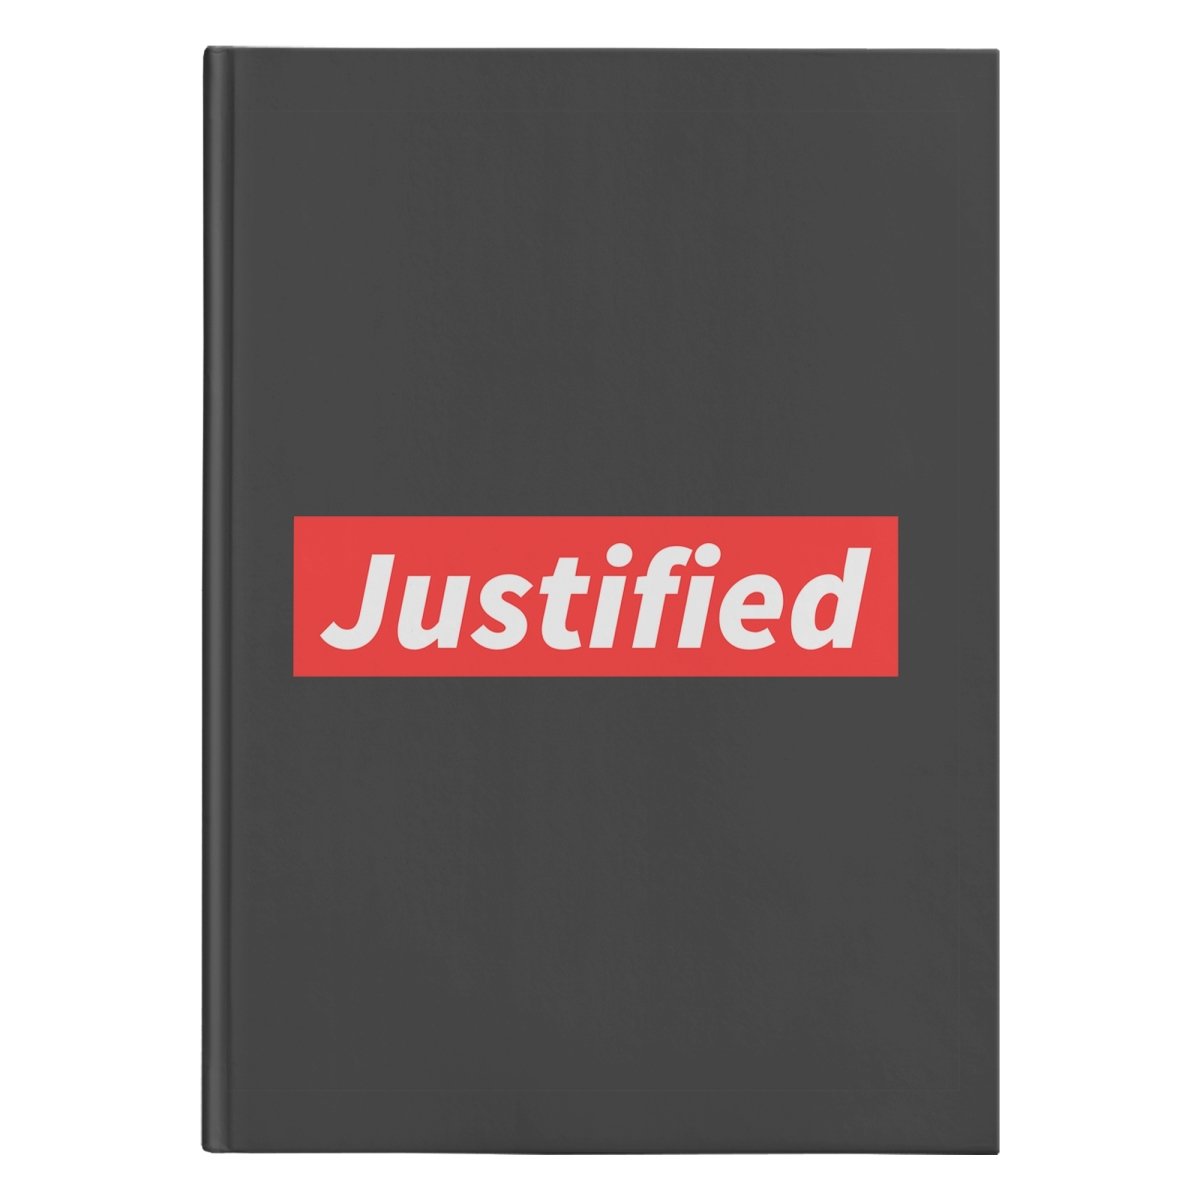 Justified (150 Page Hardcover Journal) - SDG Clothing